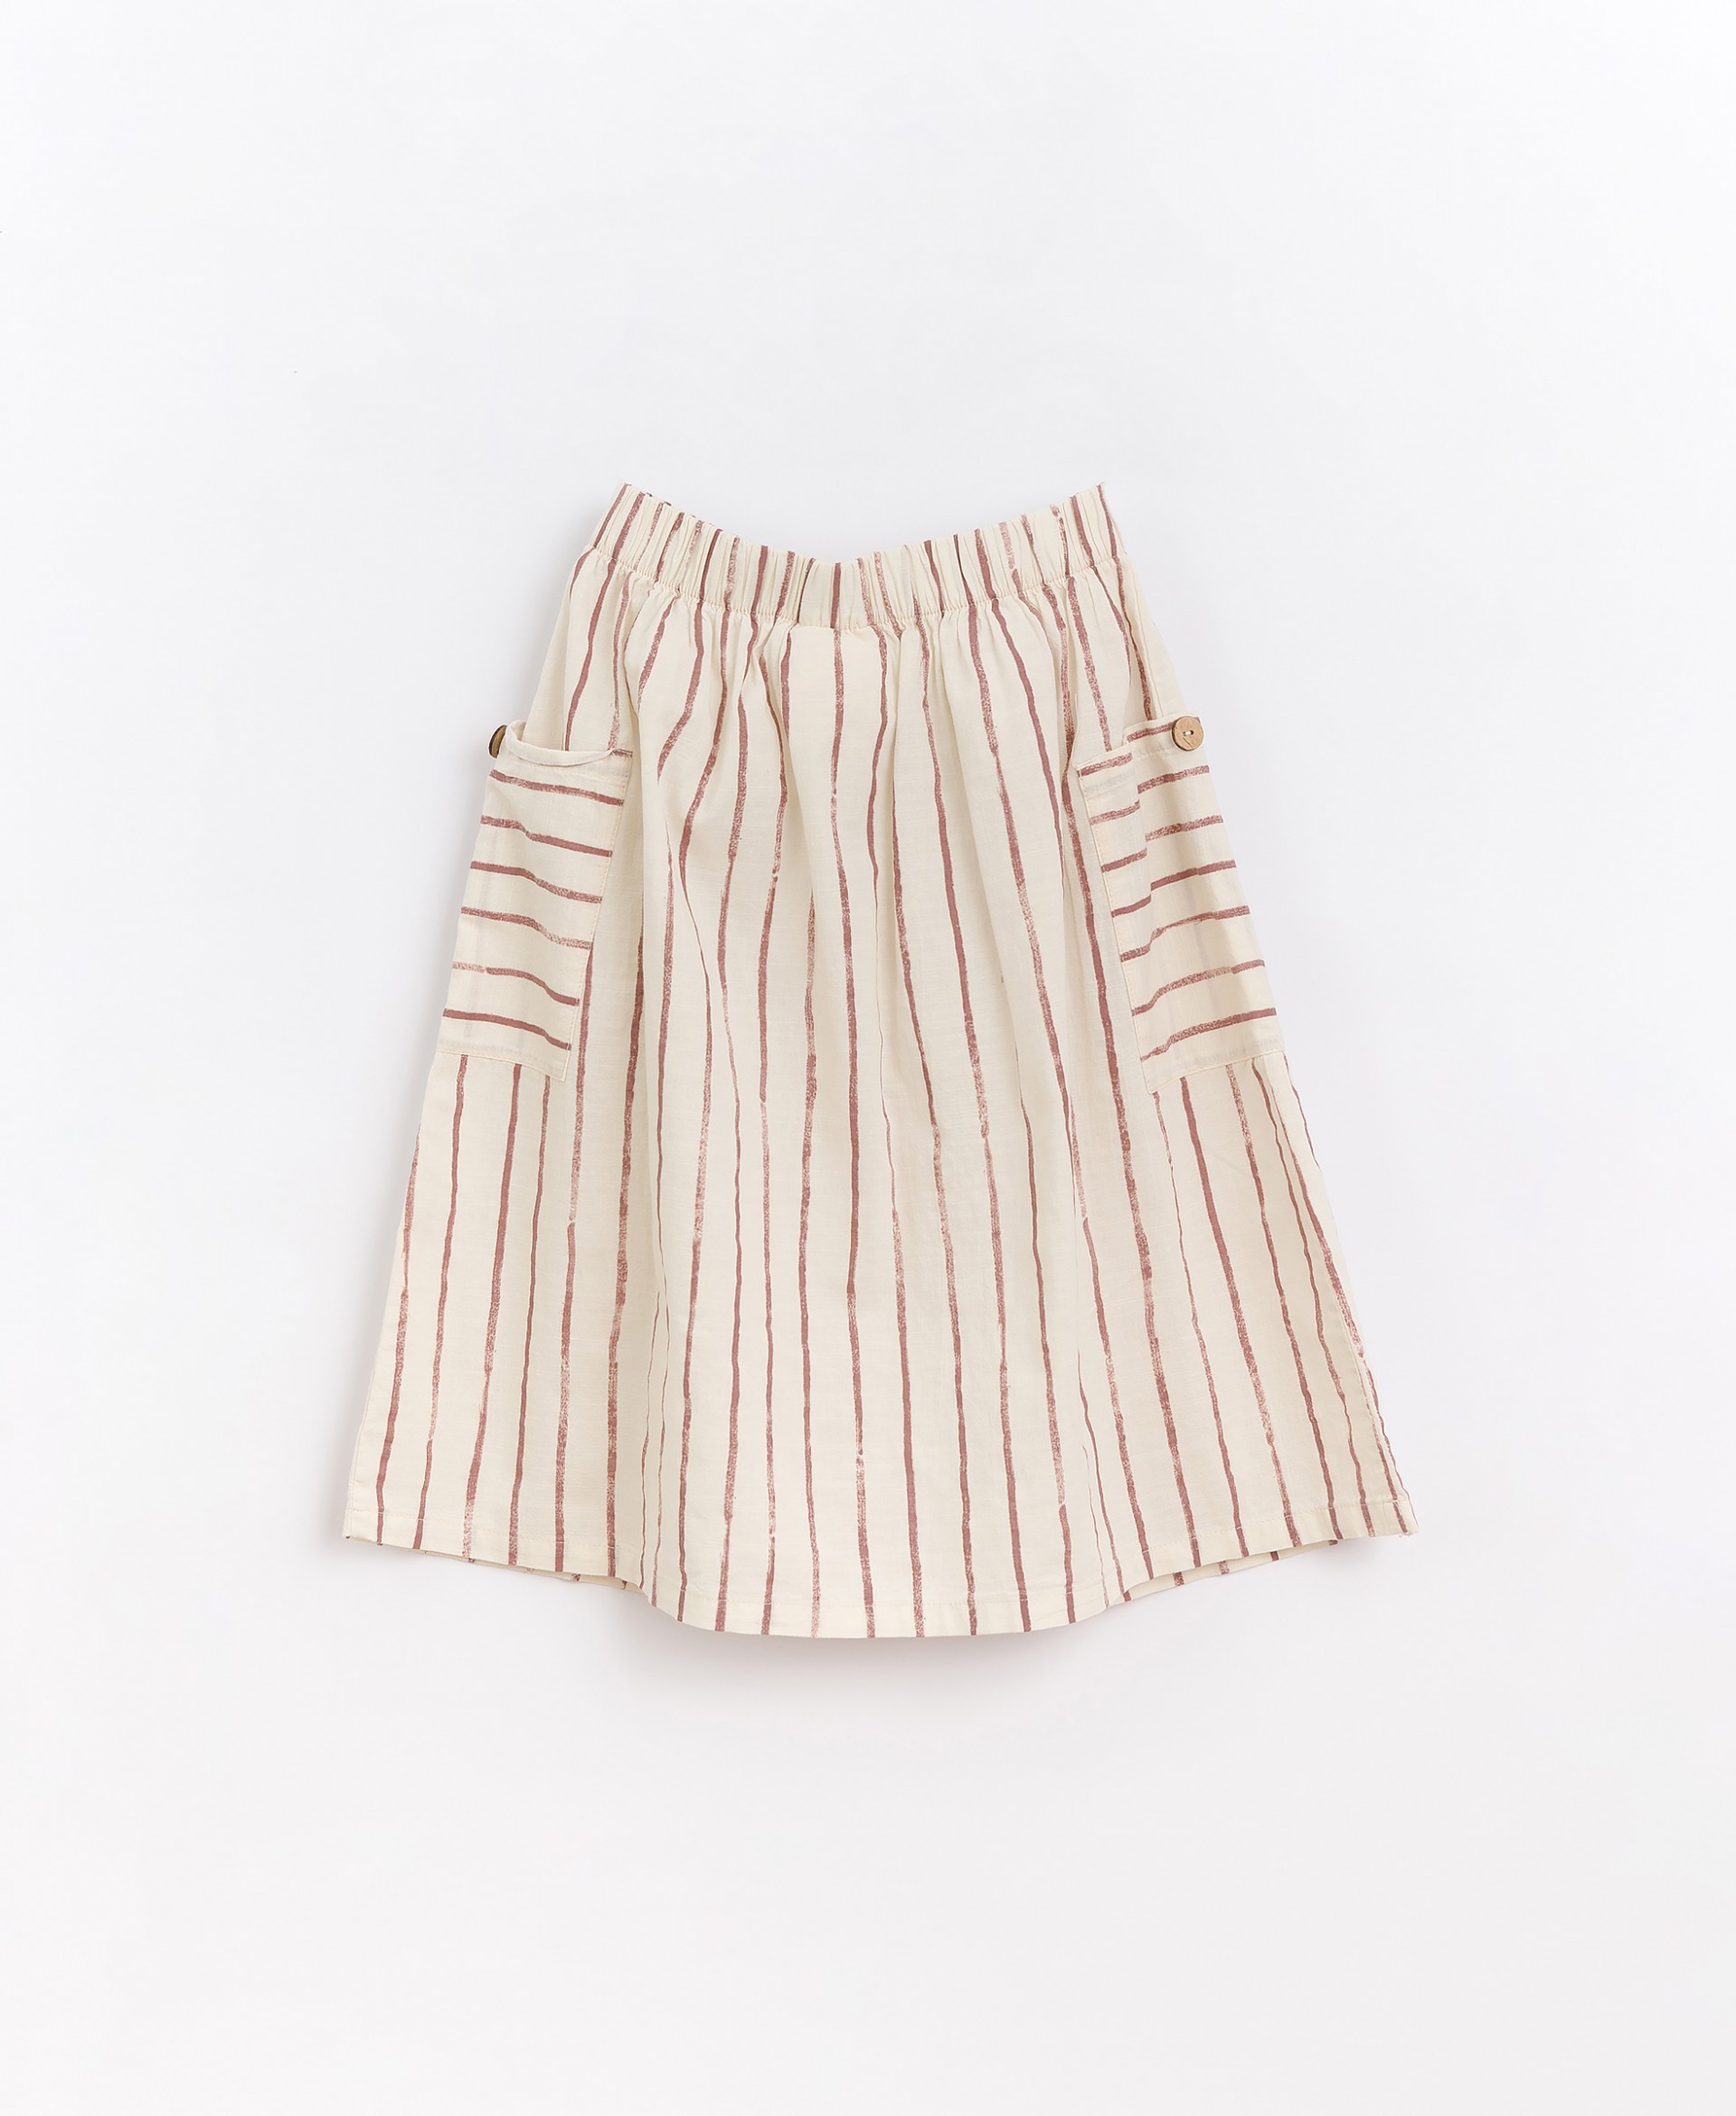 Fabric skirt with side pockets | Basketry